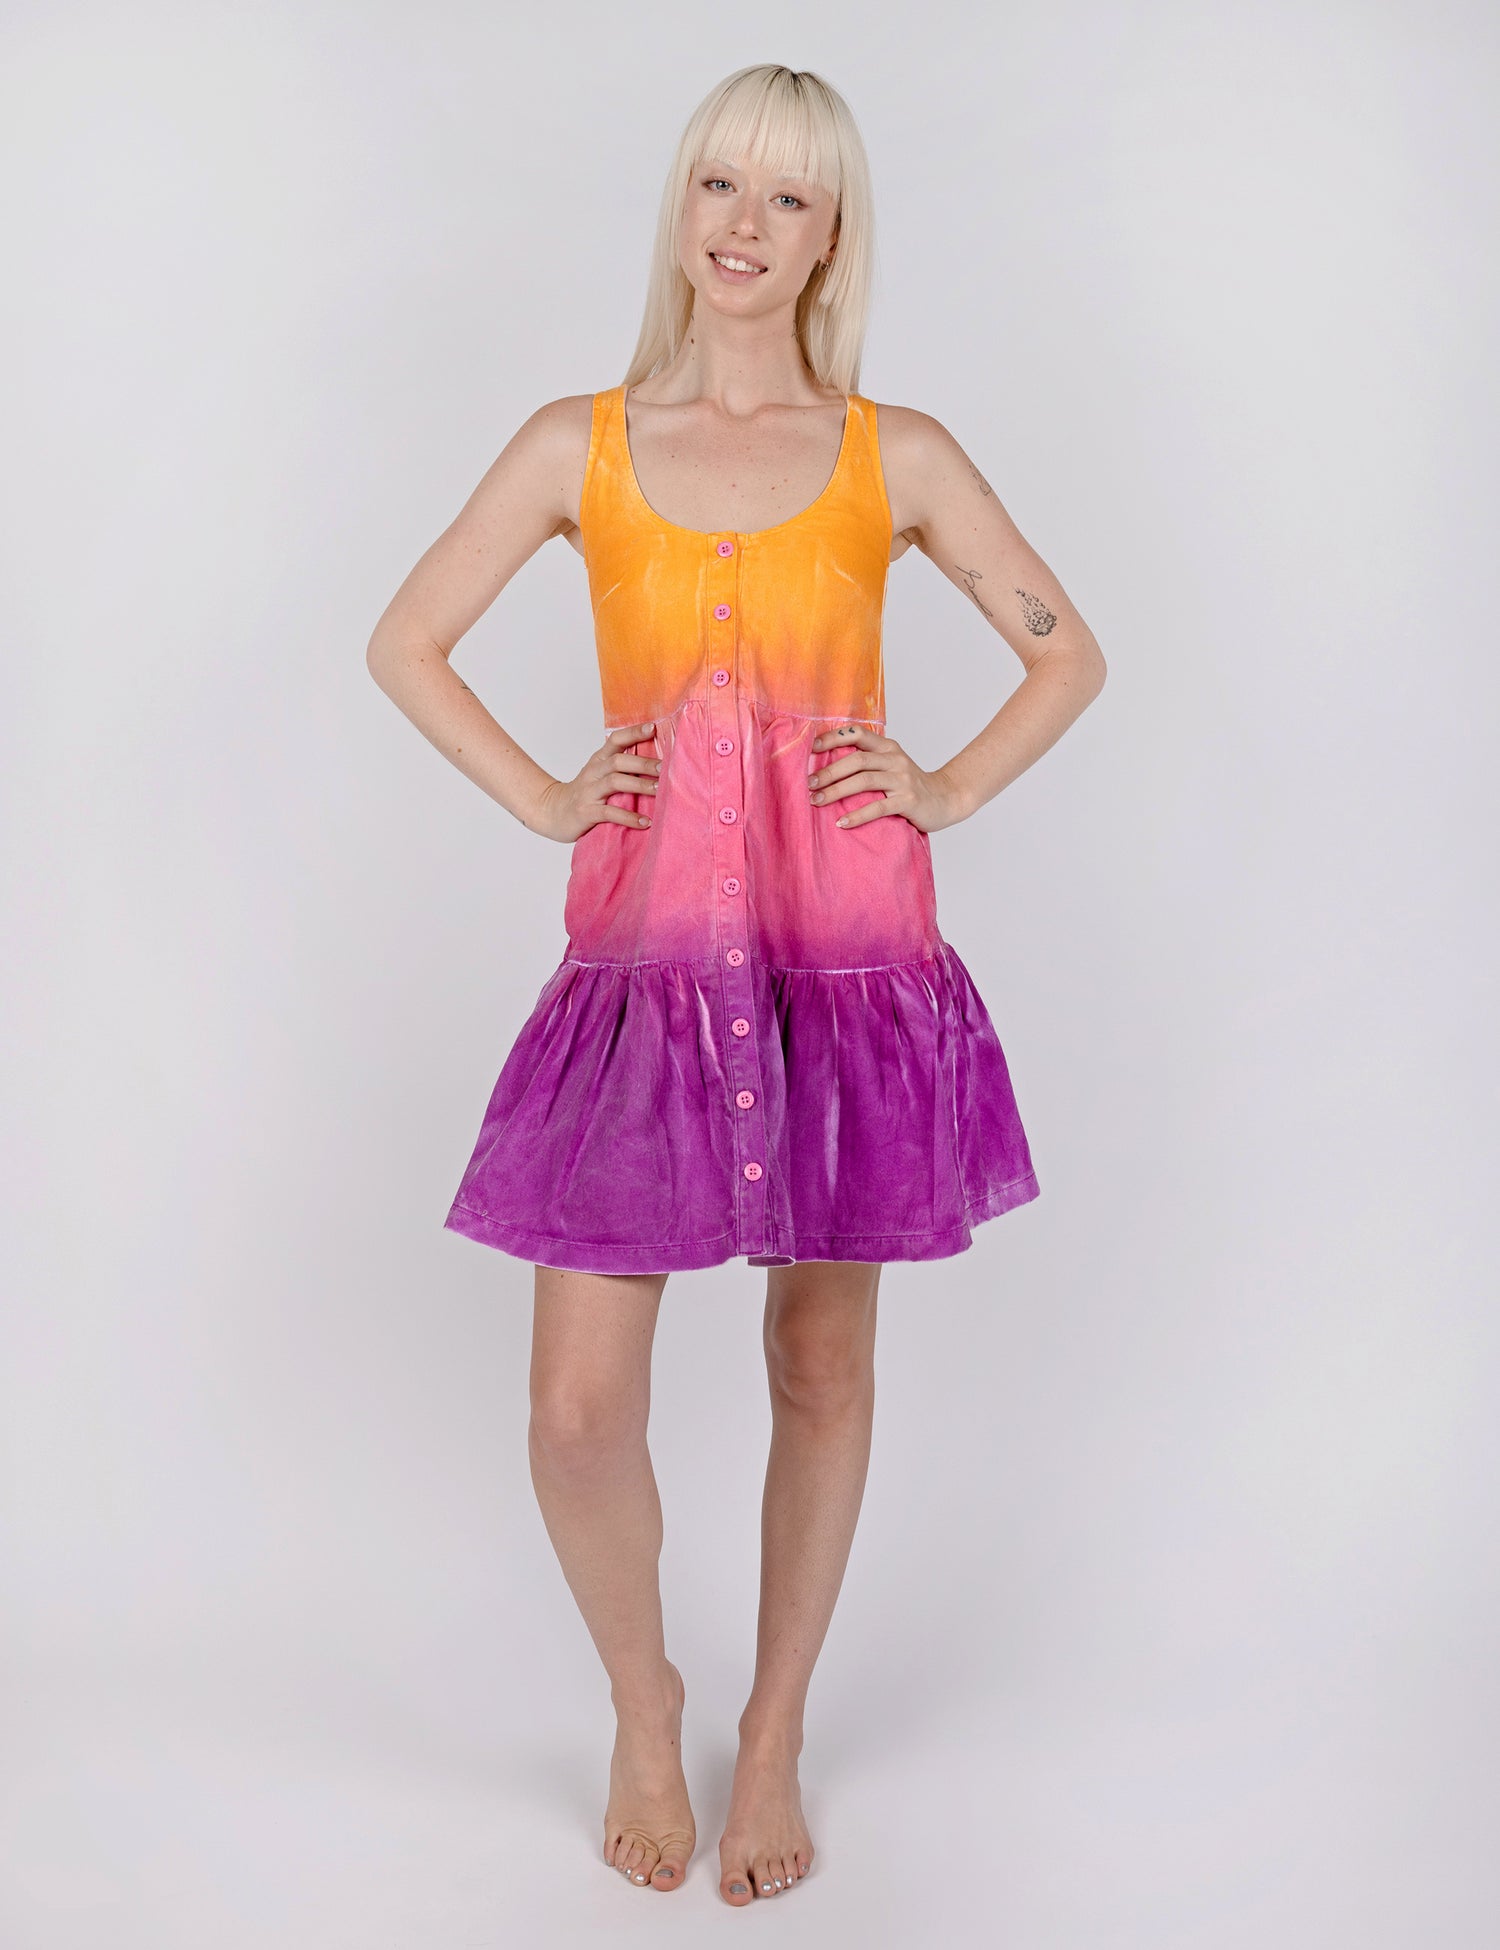 woman wearing tier style dress in gradient design of yellow pink and purple